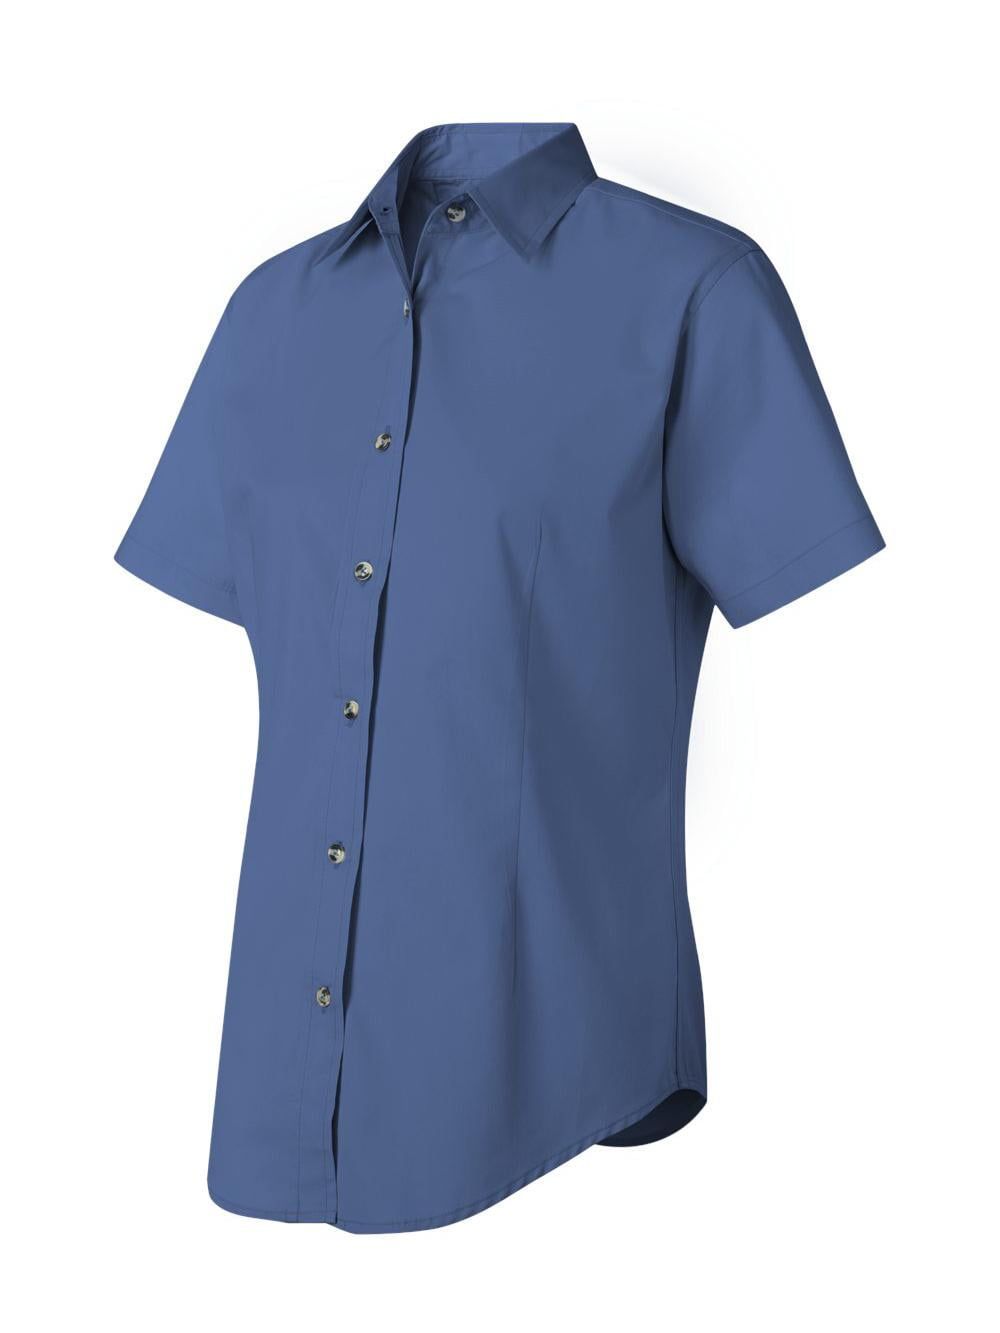 Details about   PRIMA Mens Short Sleeved Shirt Mid Blue Epaulettes Corporate Business Office 